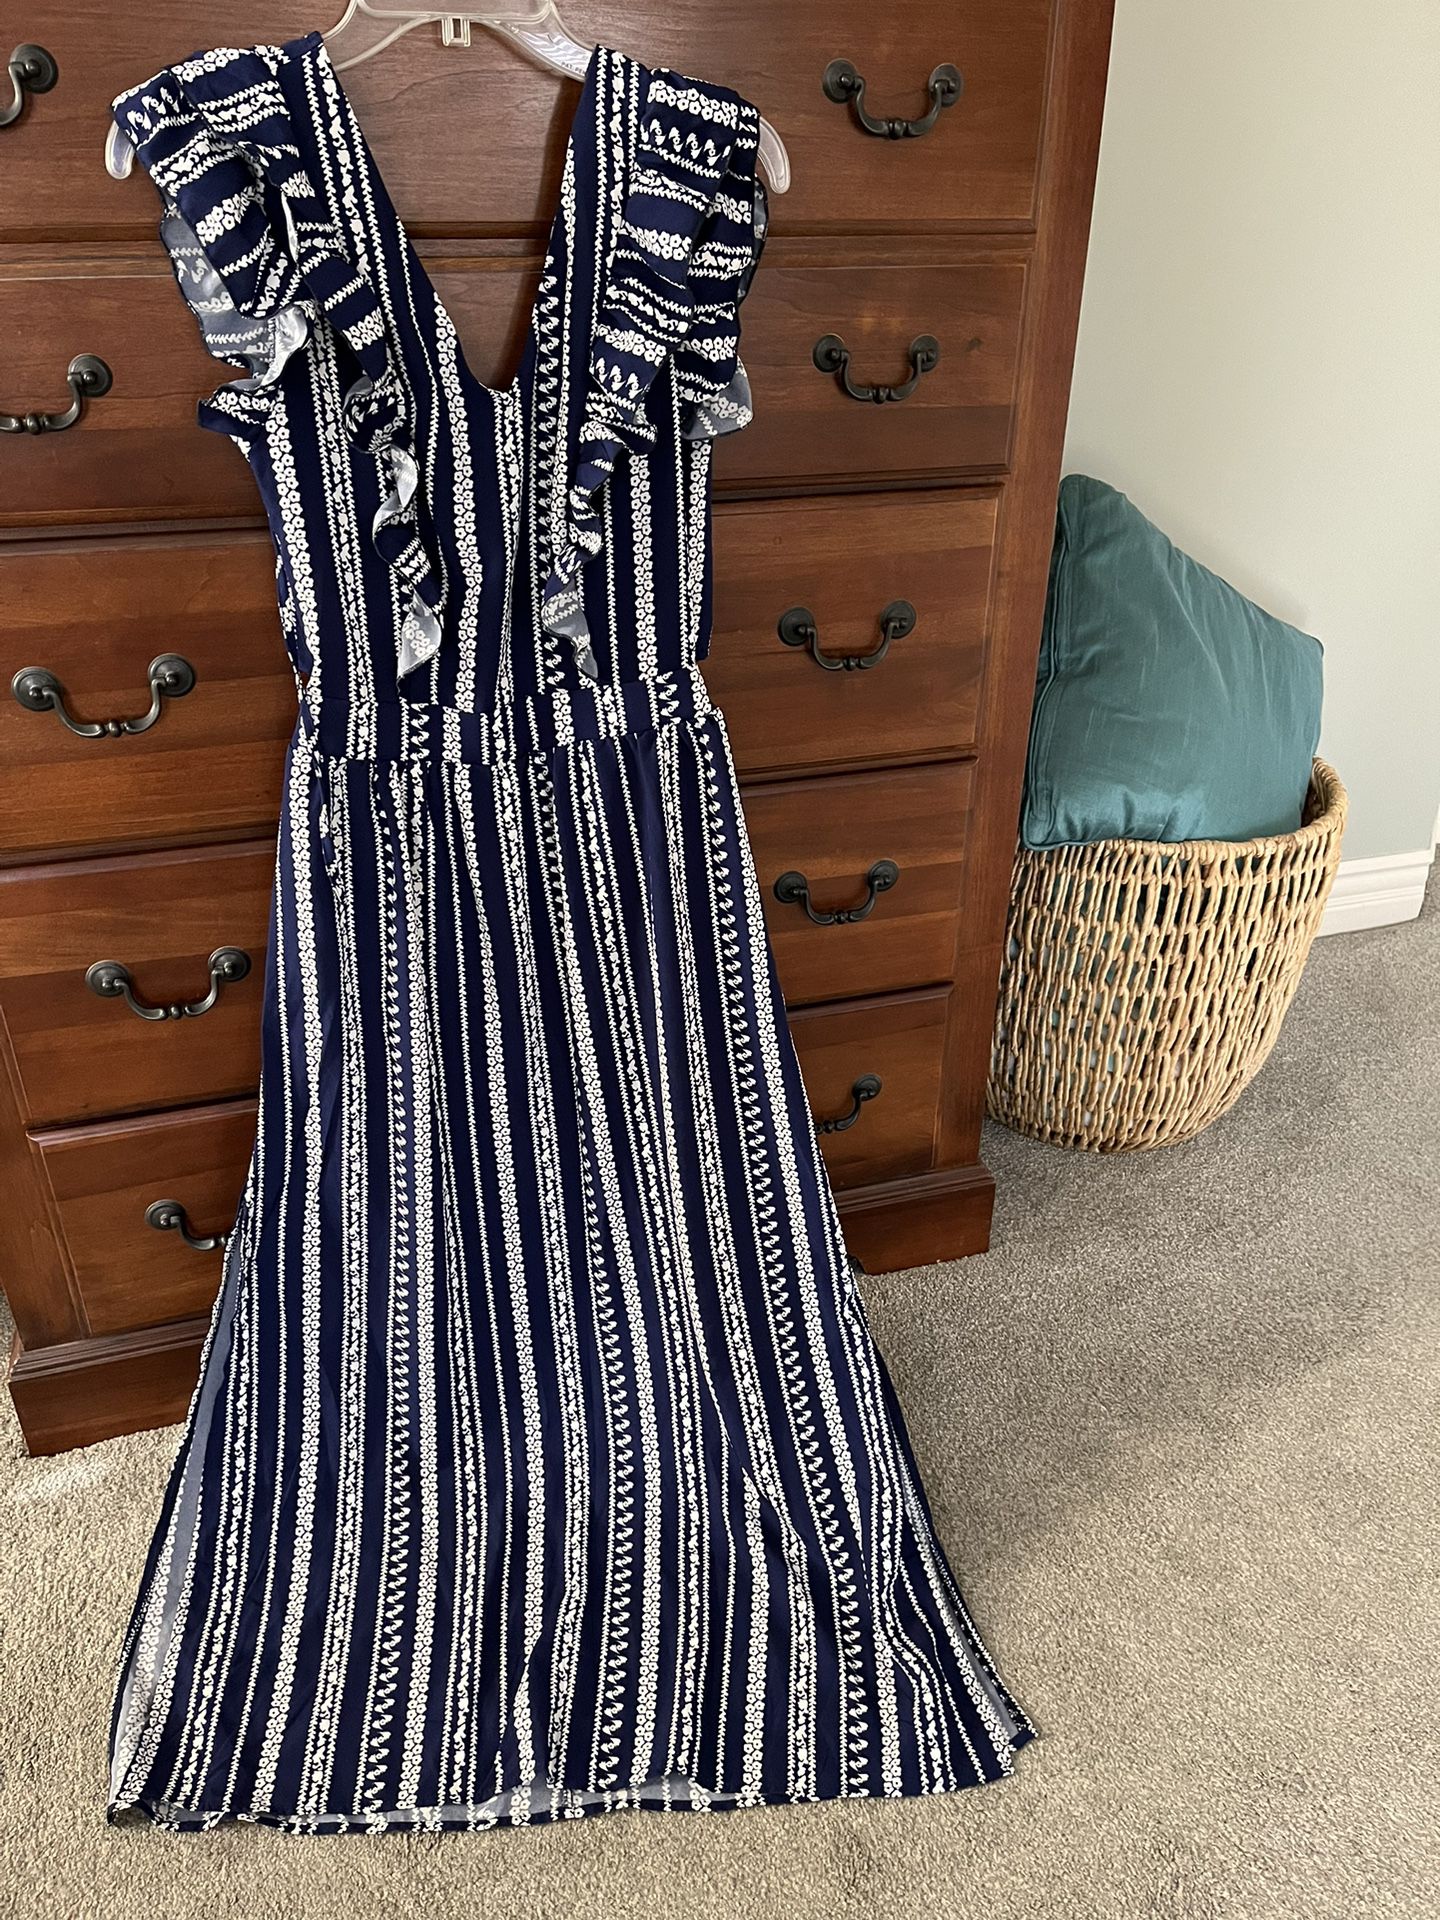 New Women’s Size M Navy Blue & White Flowing Dress - Gorgeous!